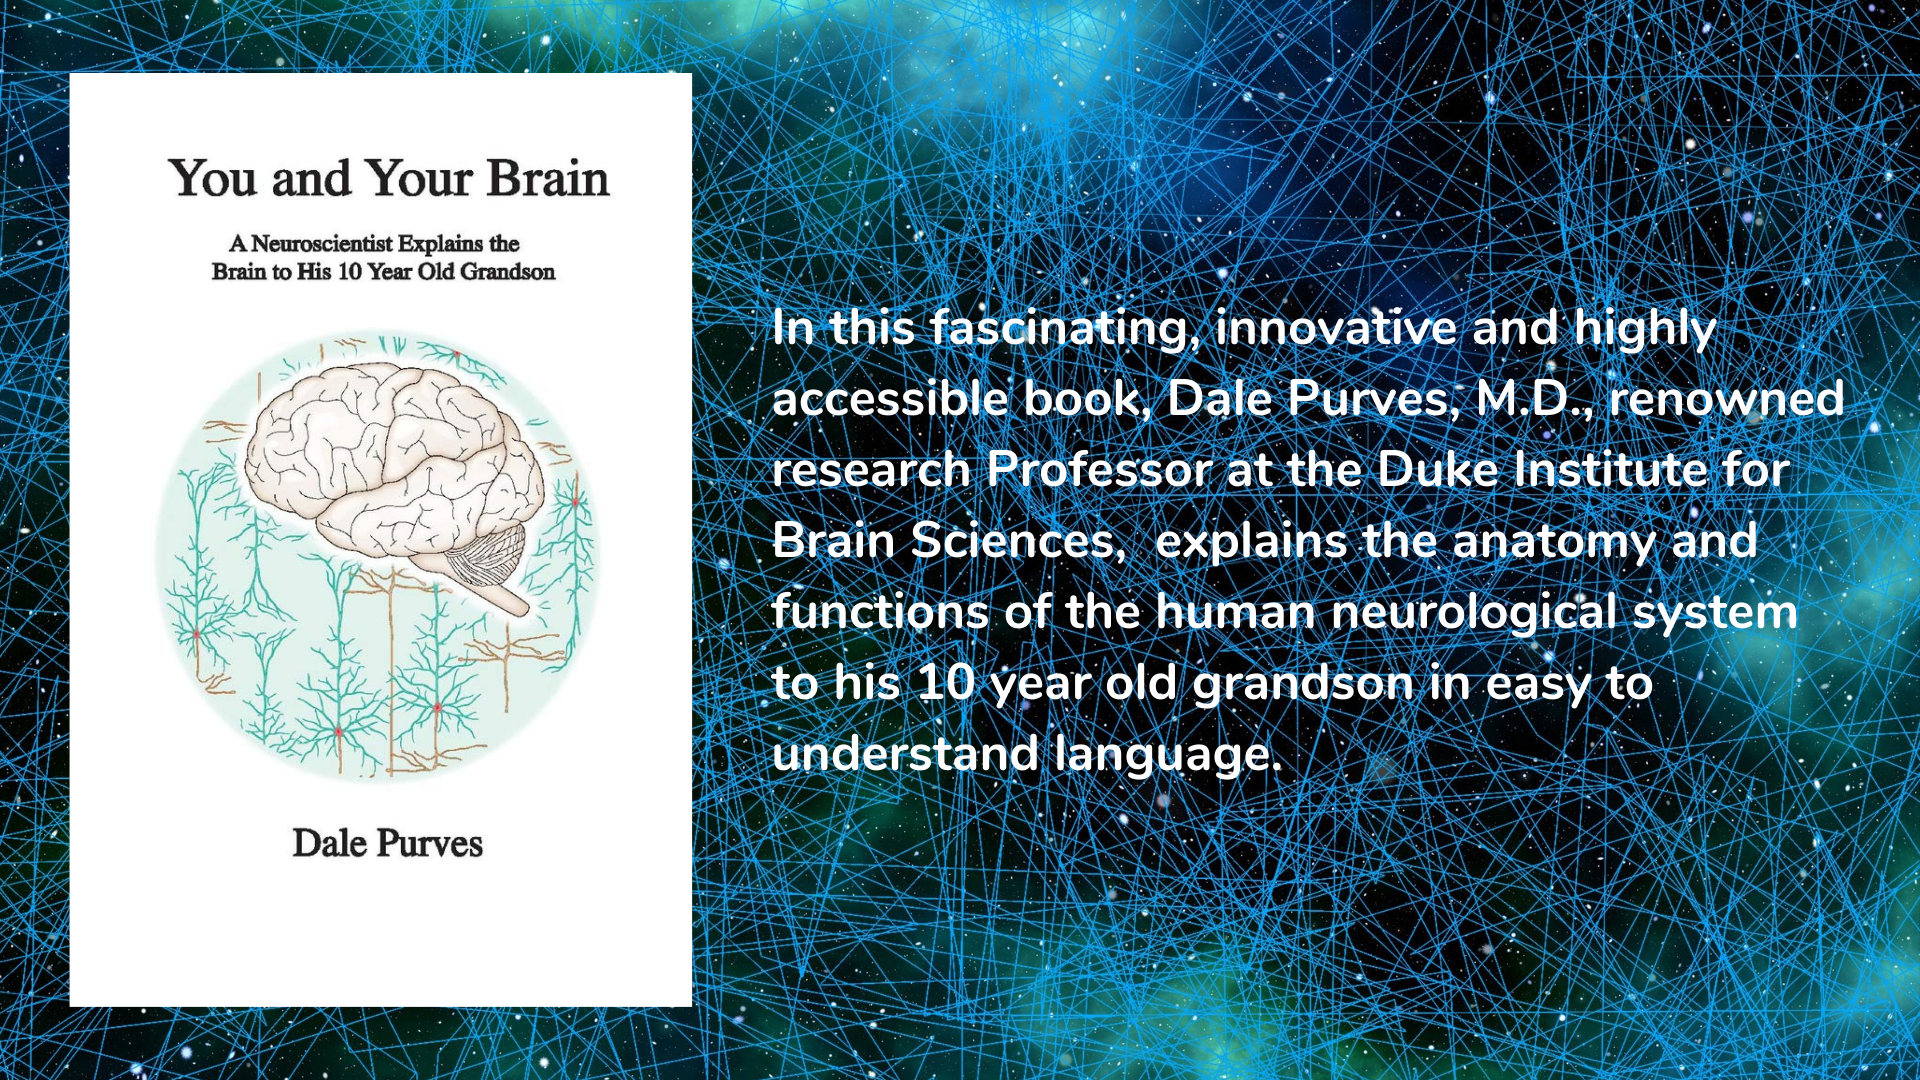 You and Your Brain, book cover and description.